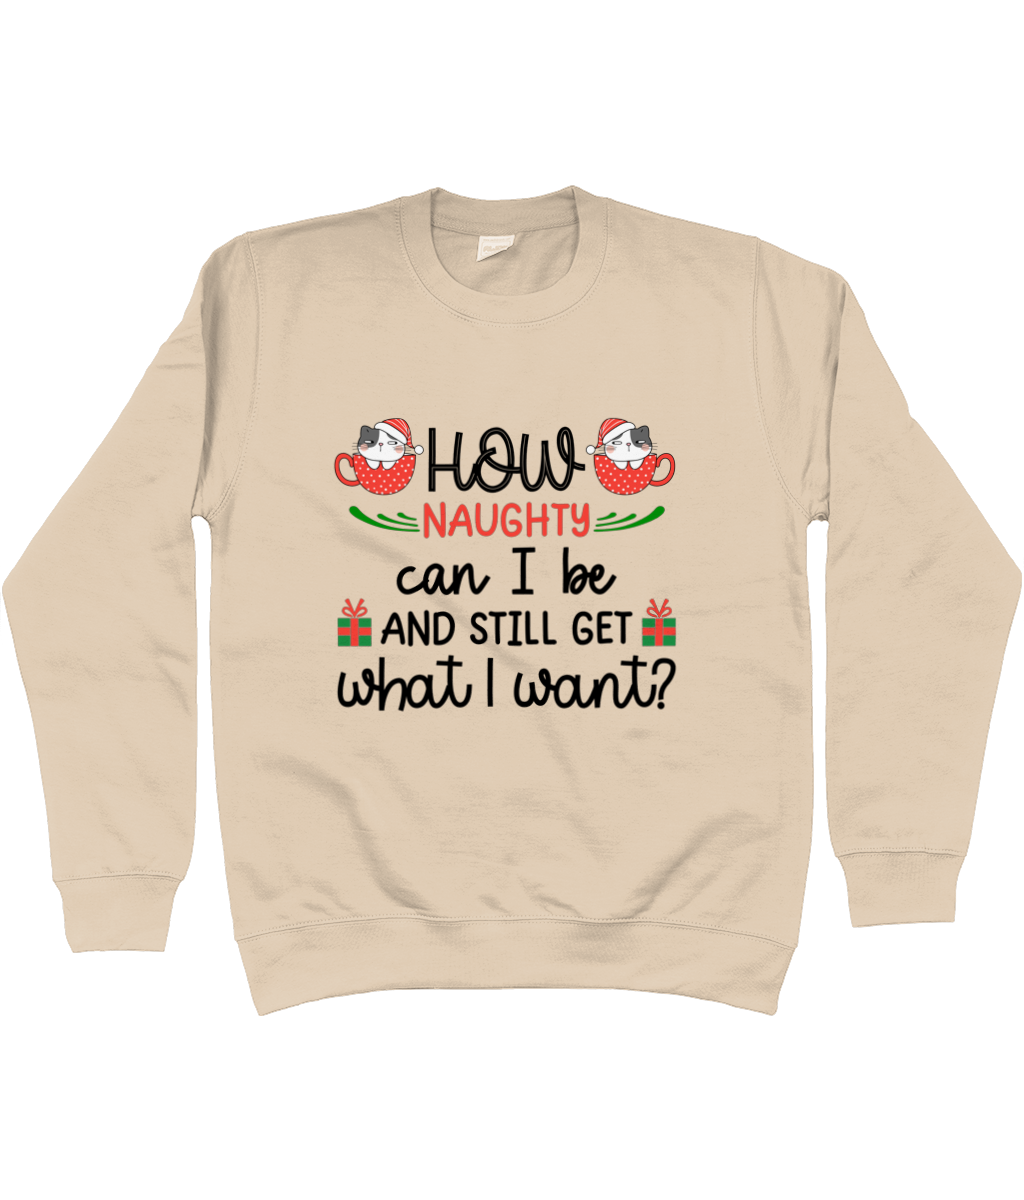 How Naughty Can I Be And Still Get What I Want - Christmas Sweatshirt